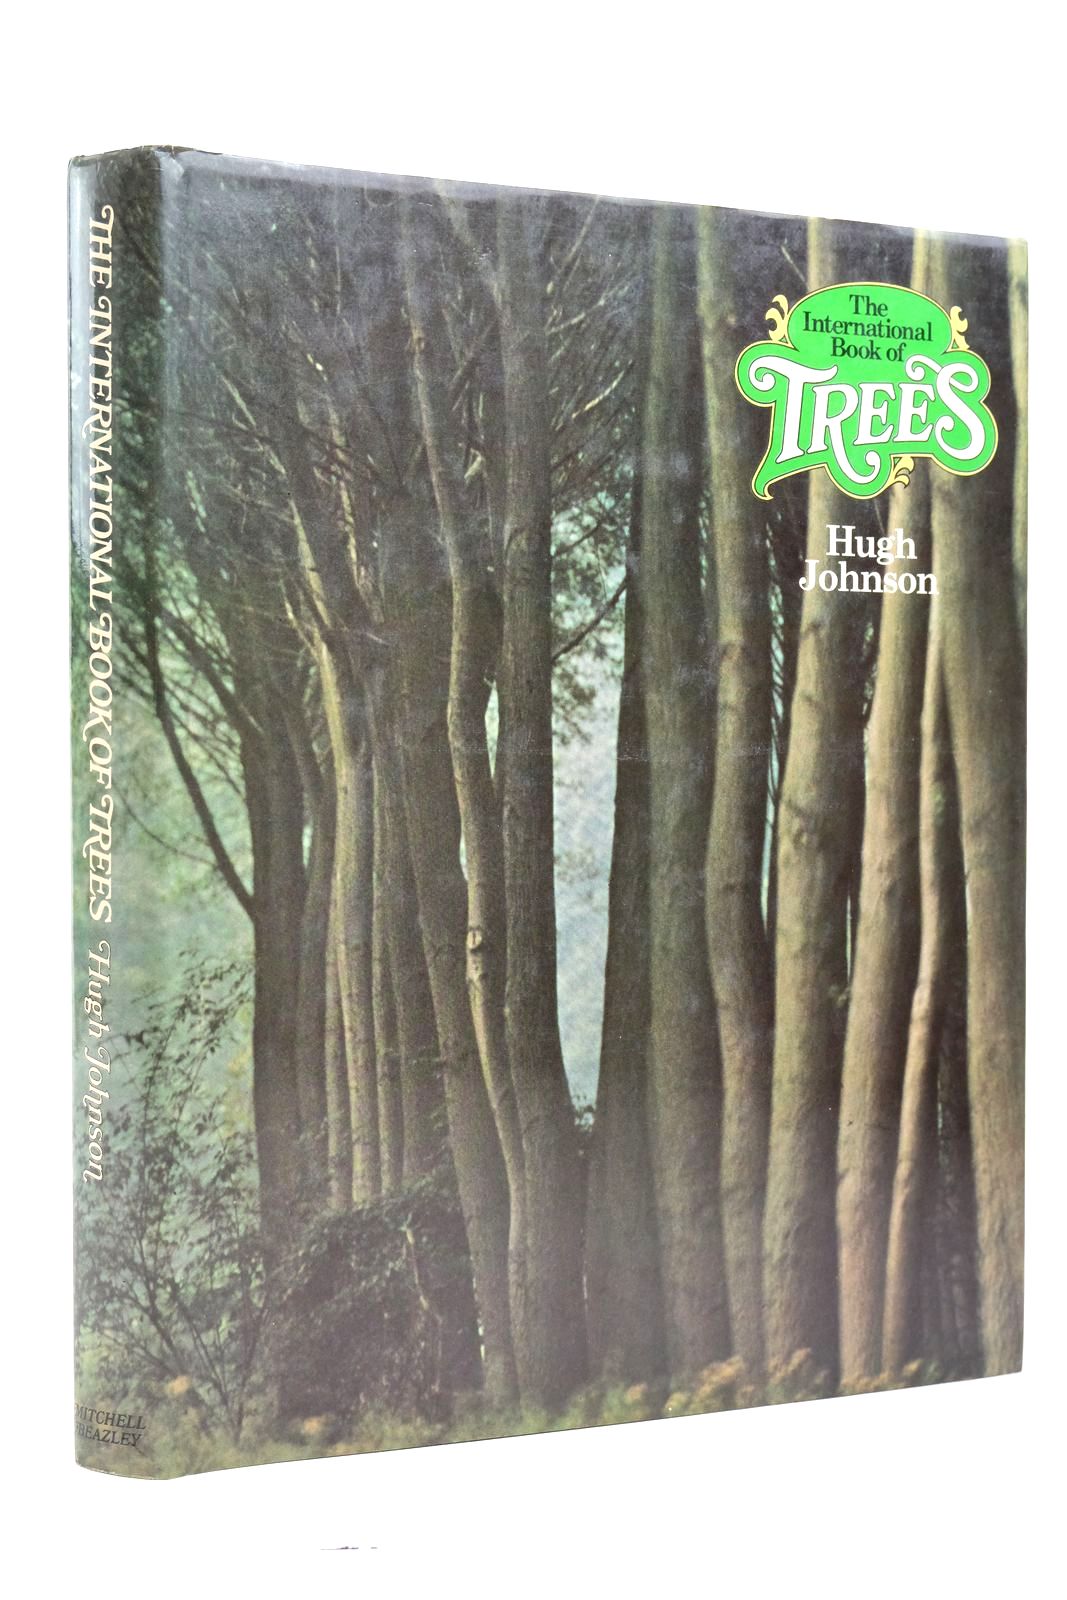 Photo of THE INTERNATIONAL BOOK OF TREES written by Johnson, Hugh published by Mitchell Beazley (STOCK CODE: 2139631)  for sale by Stella & Rose's Books